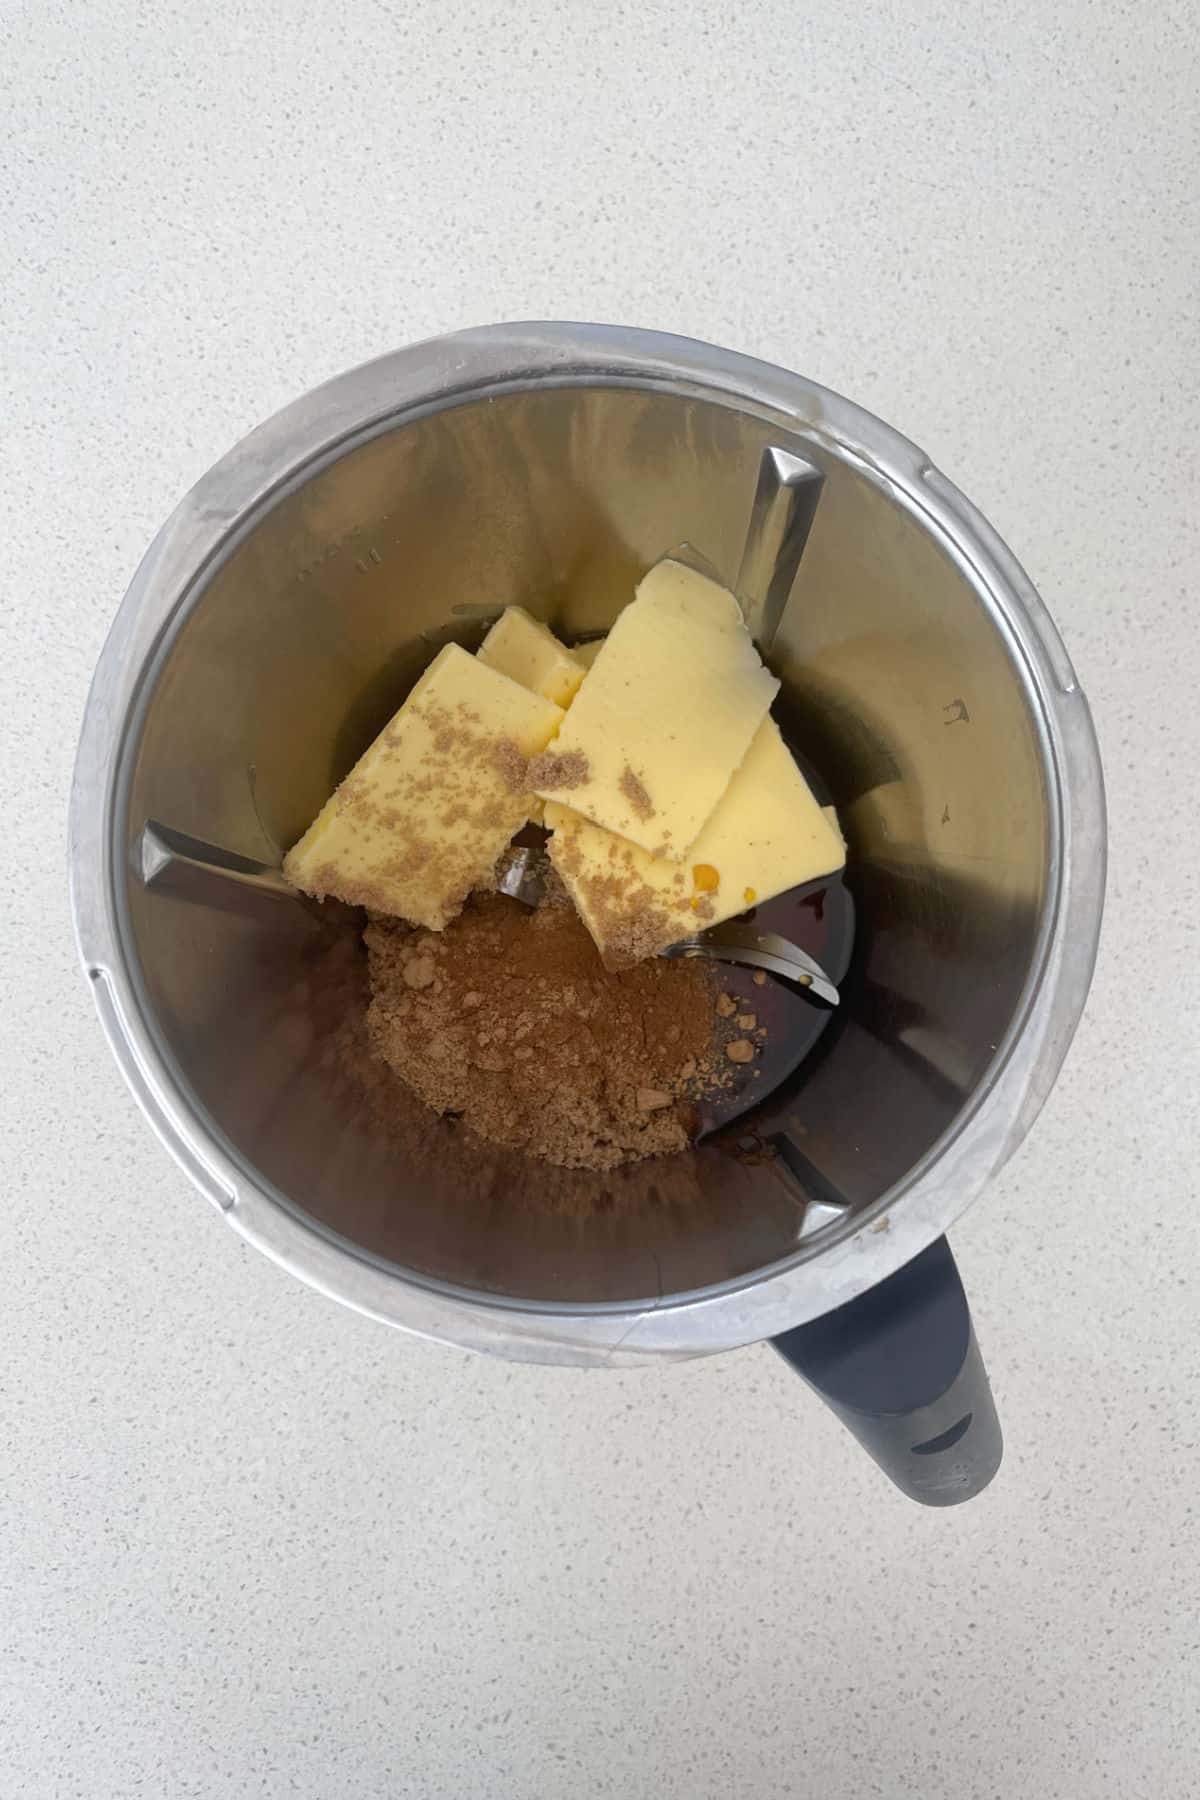 Ingredients to make gingerbread in a thermomix bowl.